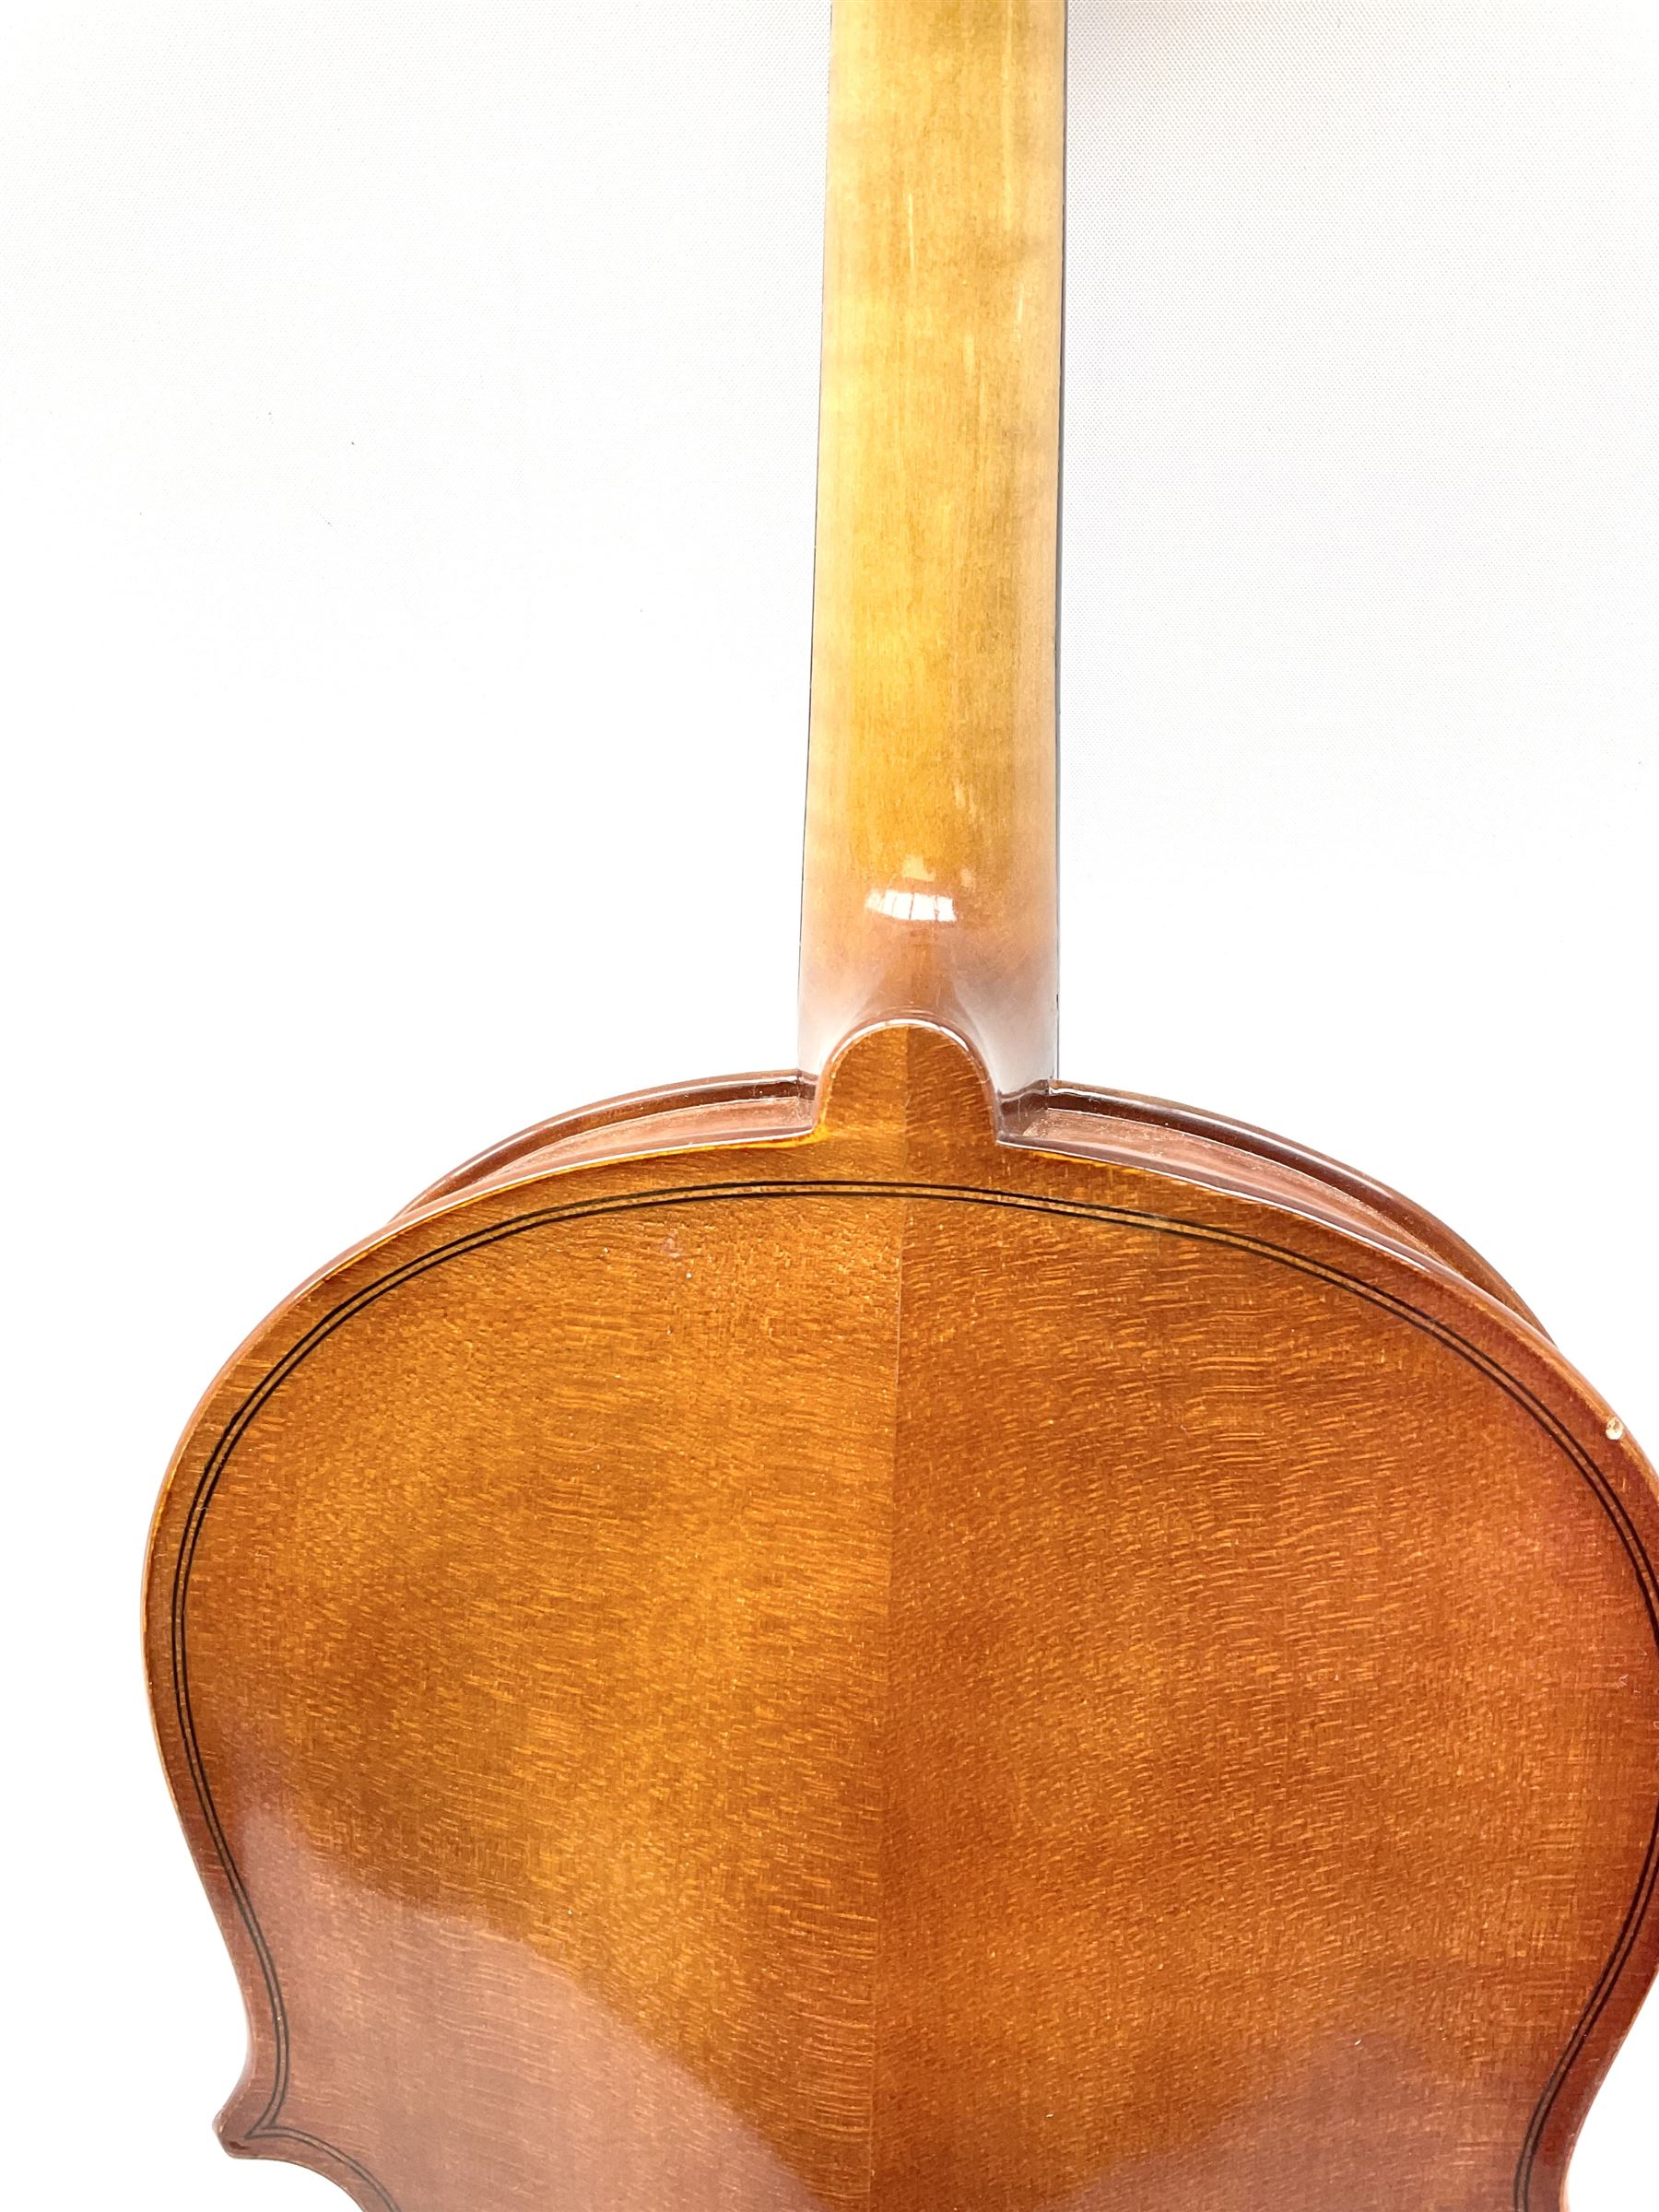 Modern violin with 36cm two-piece maple back and ribs and spruce top 60cm overall - Image 11 of 16